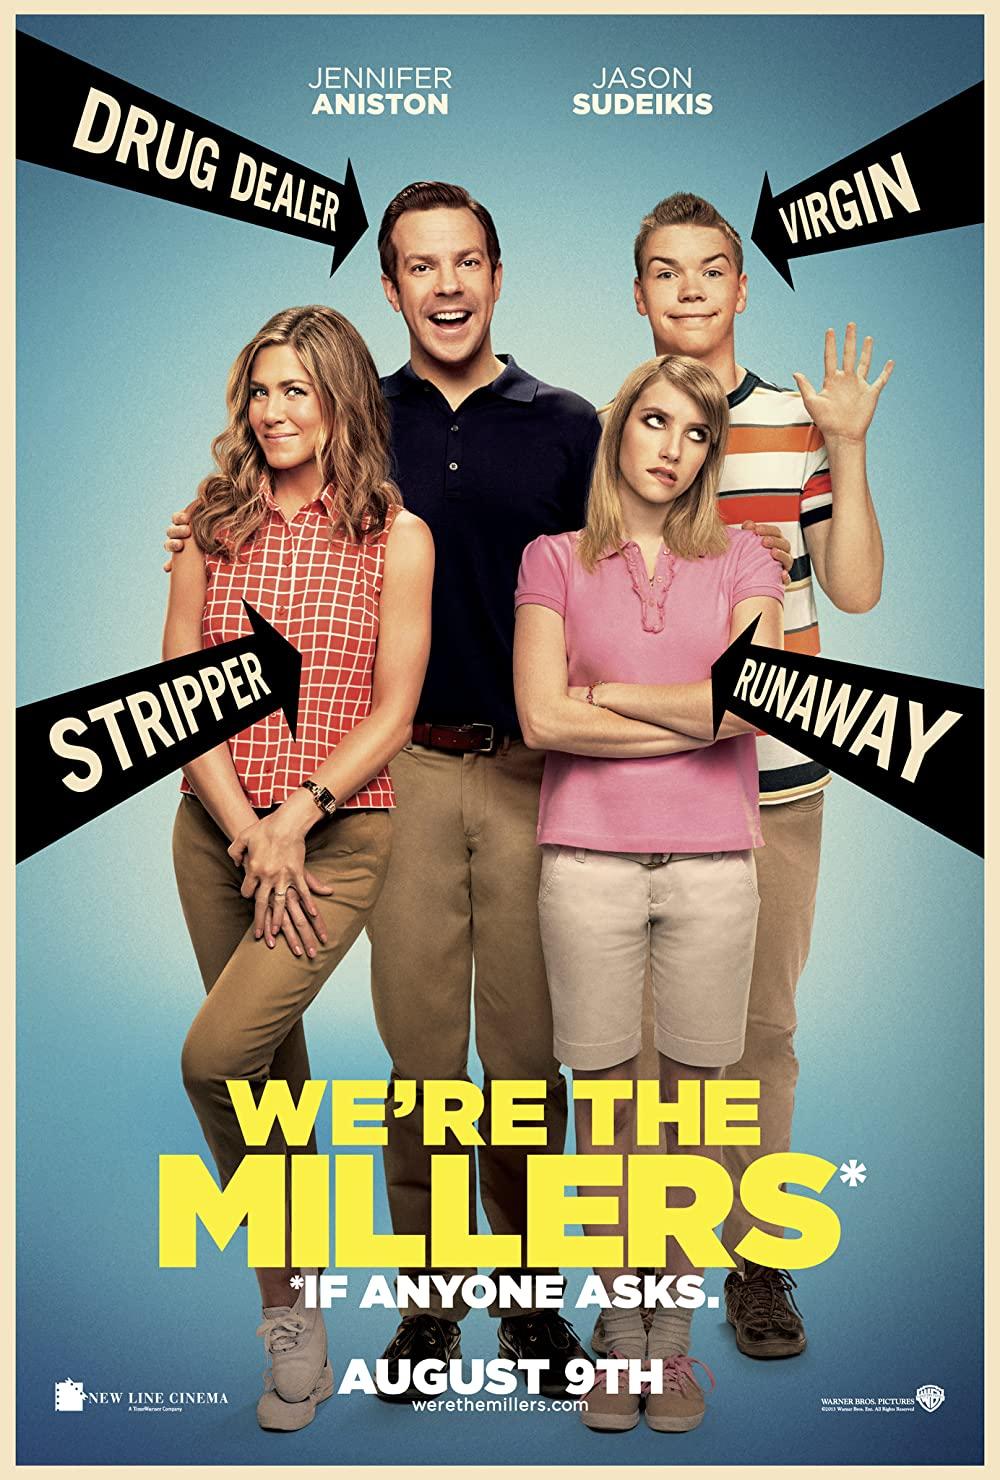 1. WE’RE THE MILLERS 